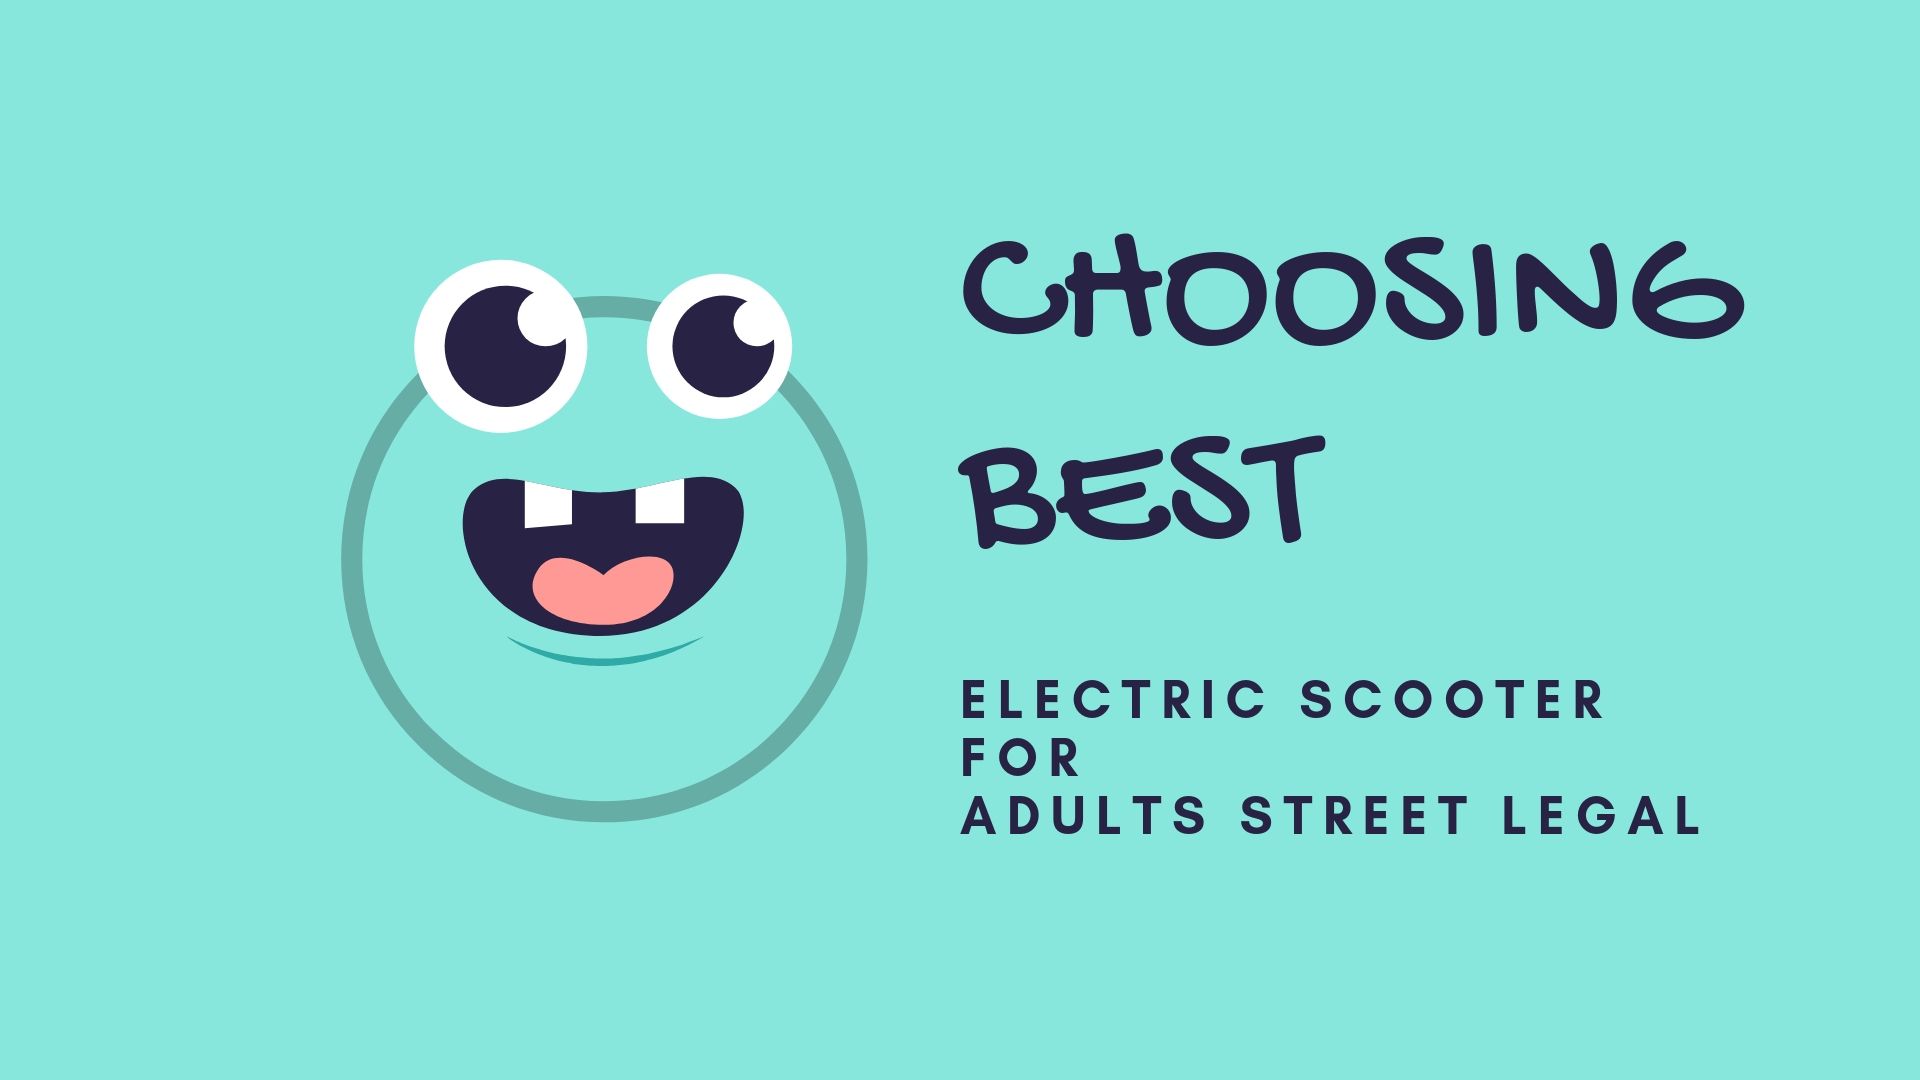 Choosing-Best-electric-scooters-for-adults-street-legal-guidecool